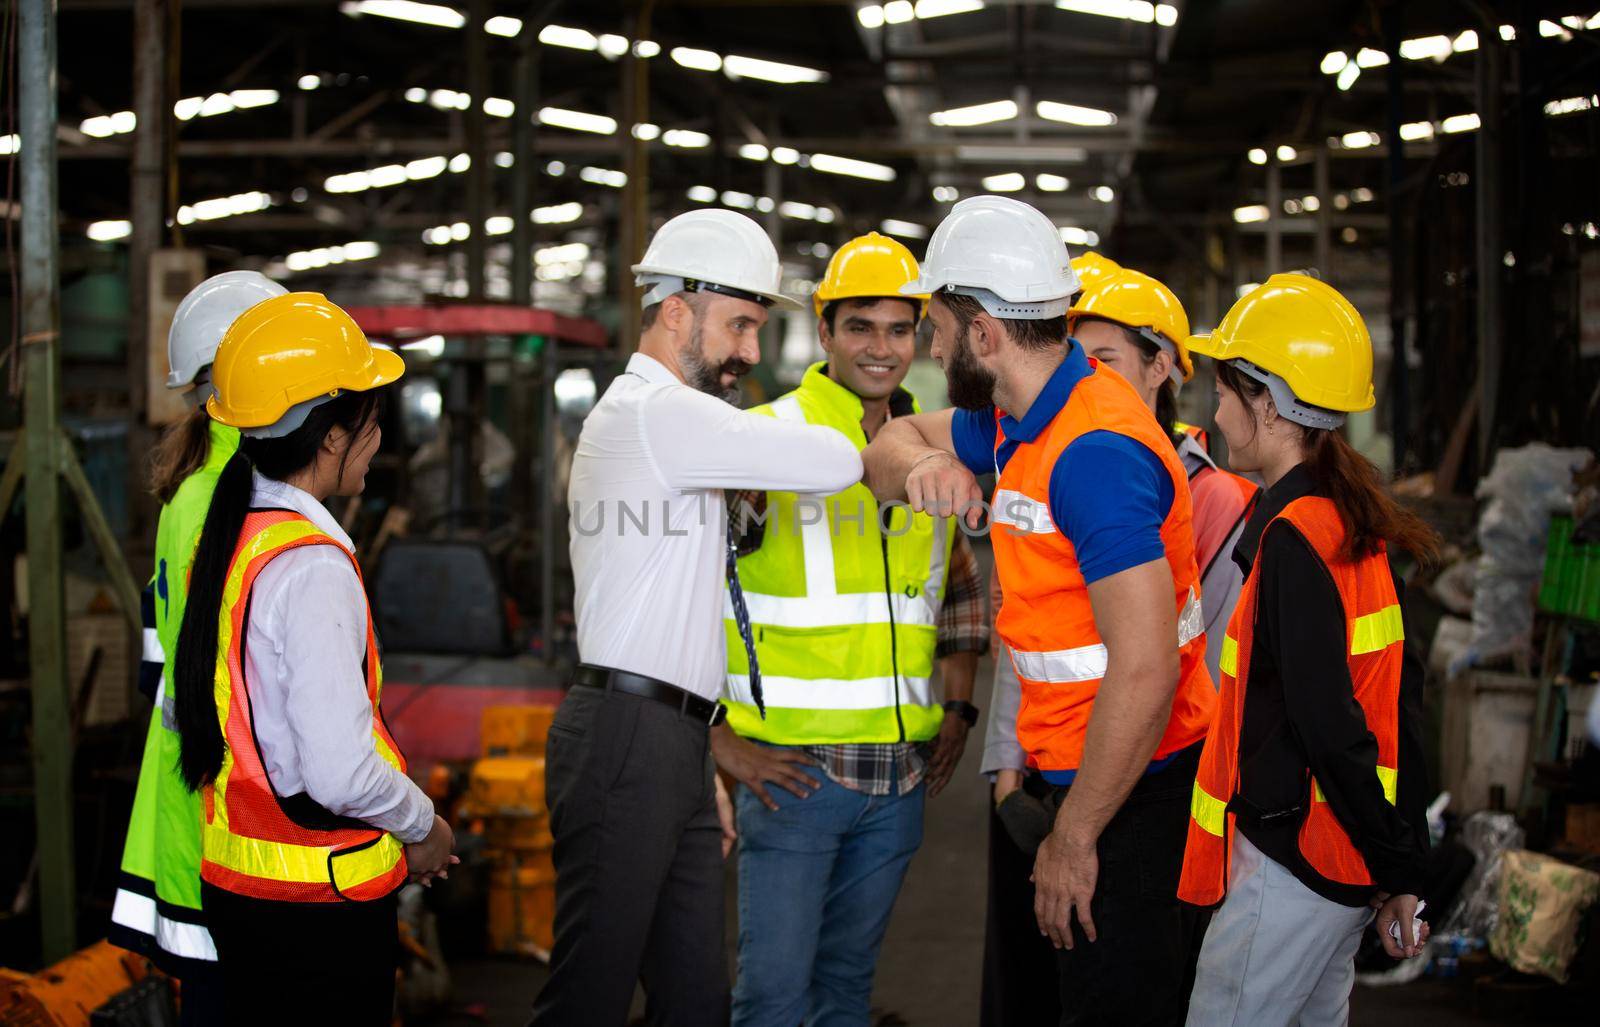 Male Industrial Engineers Talk with Factory Worker . They Work at the Heavy Industry Manufacturing Facility.